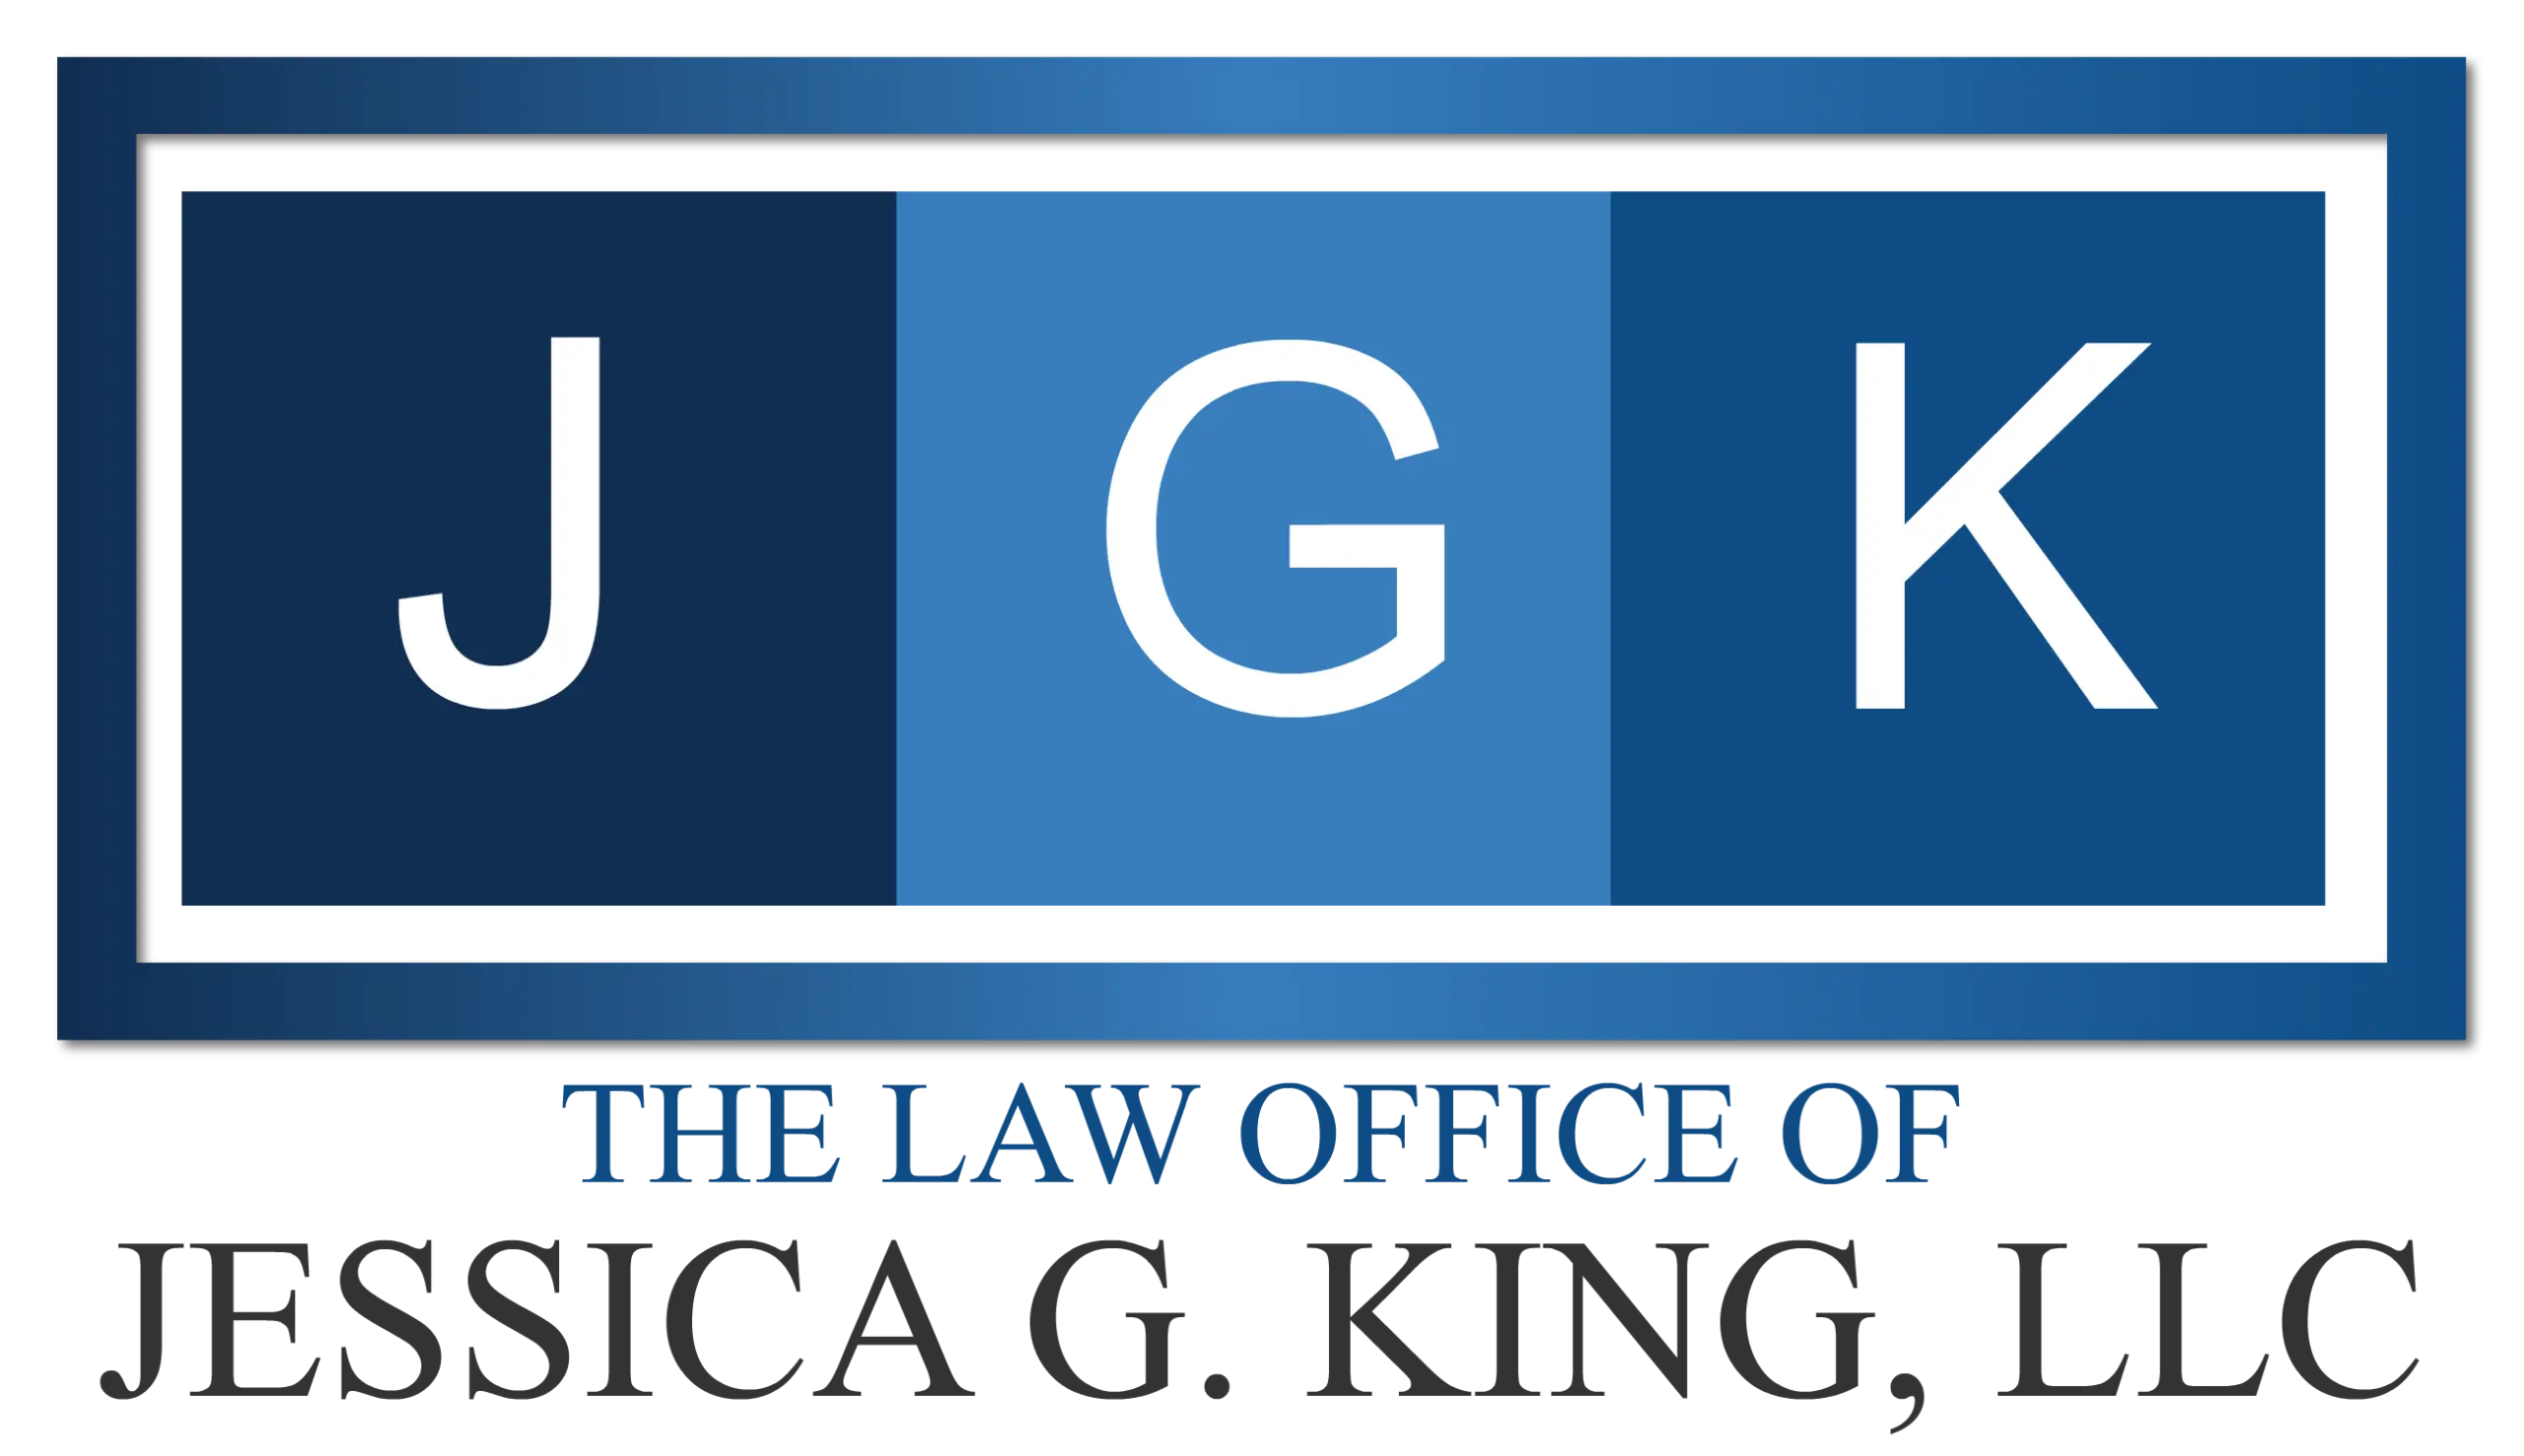 The Law Office of Jessica G. King, LLC